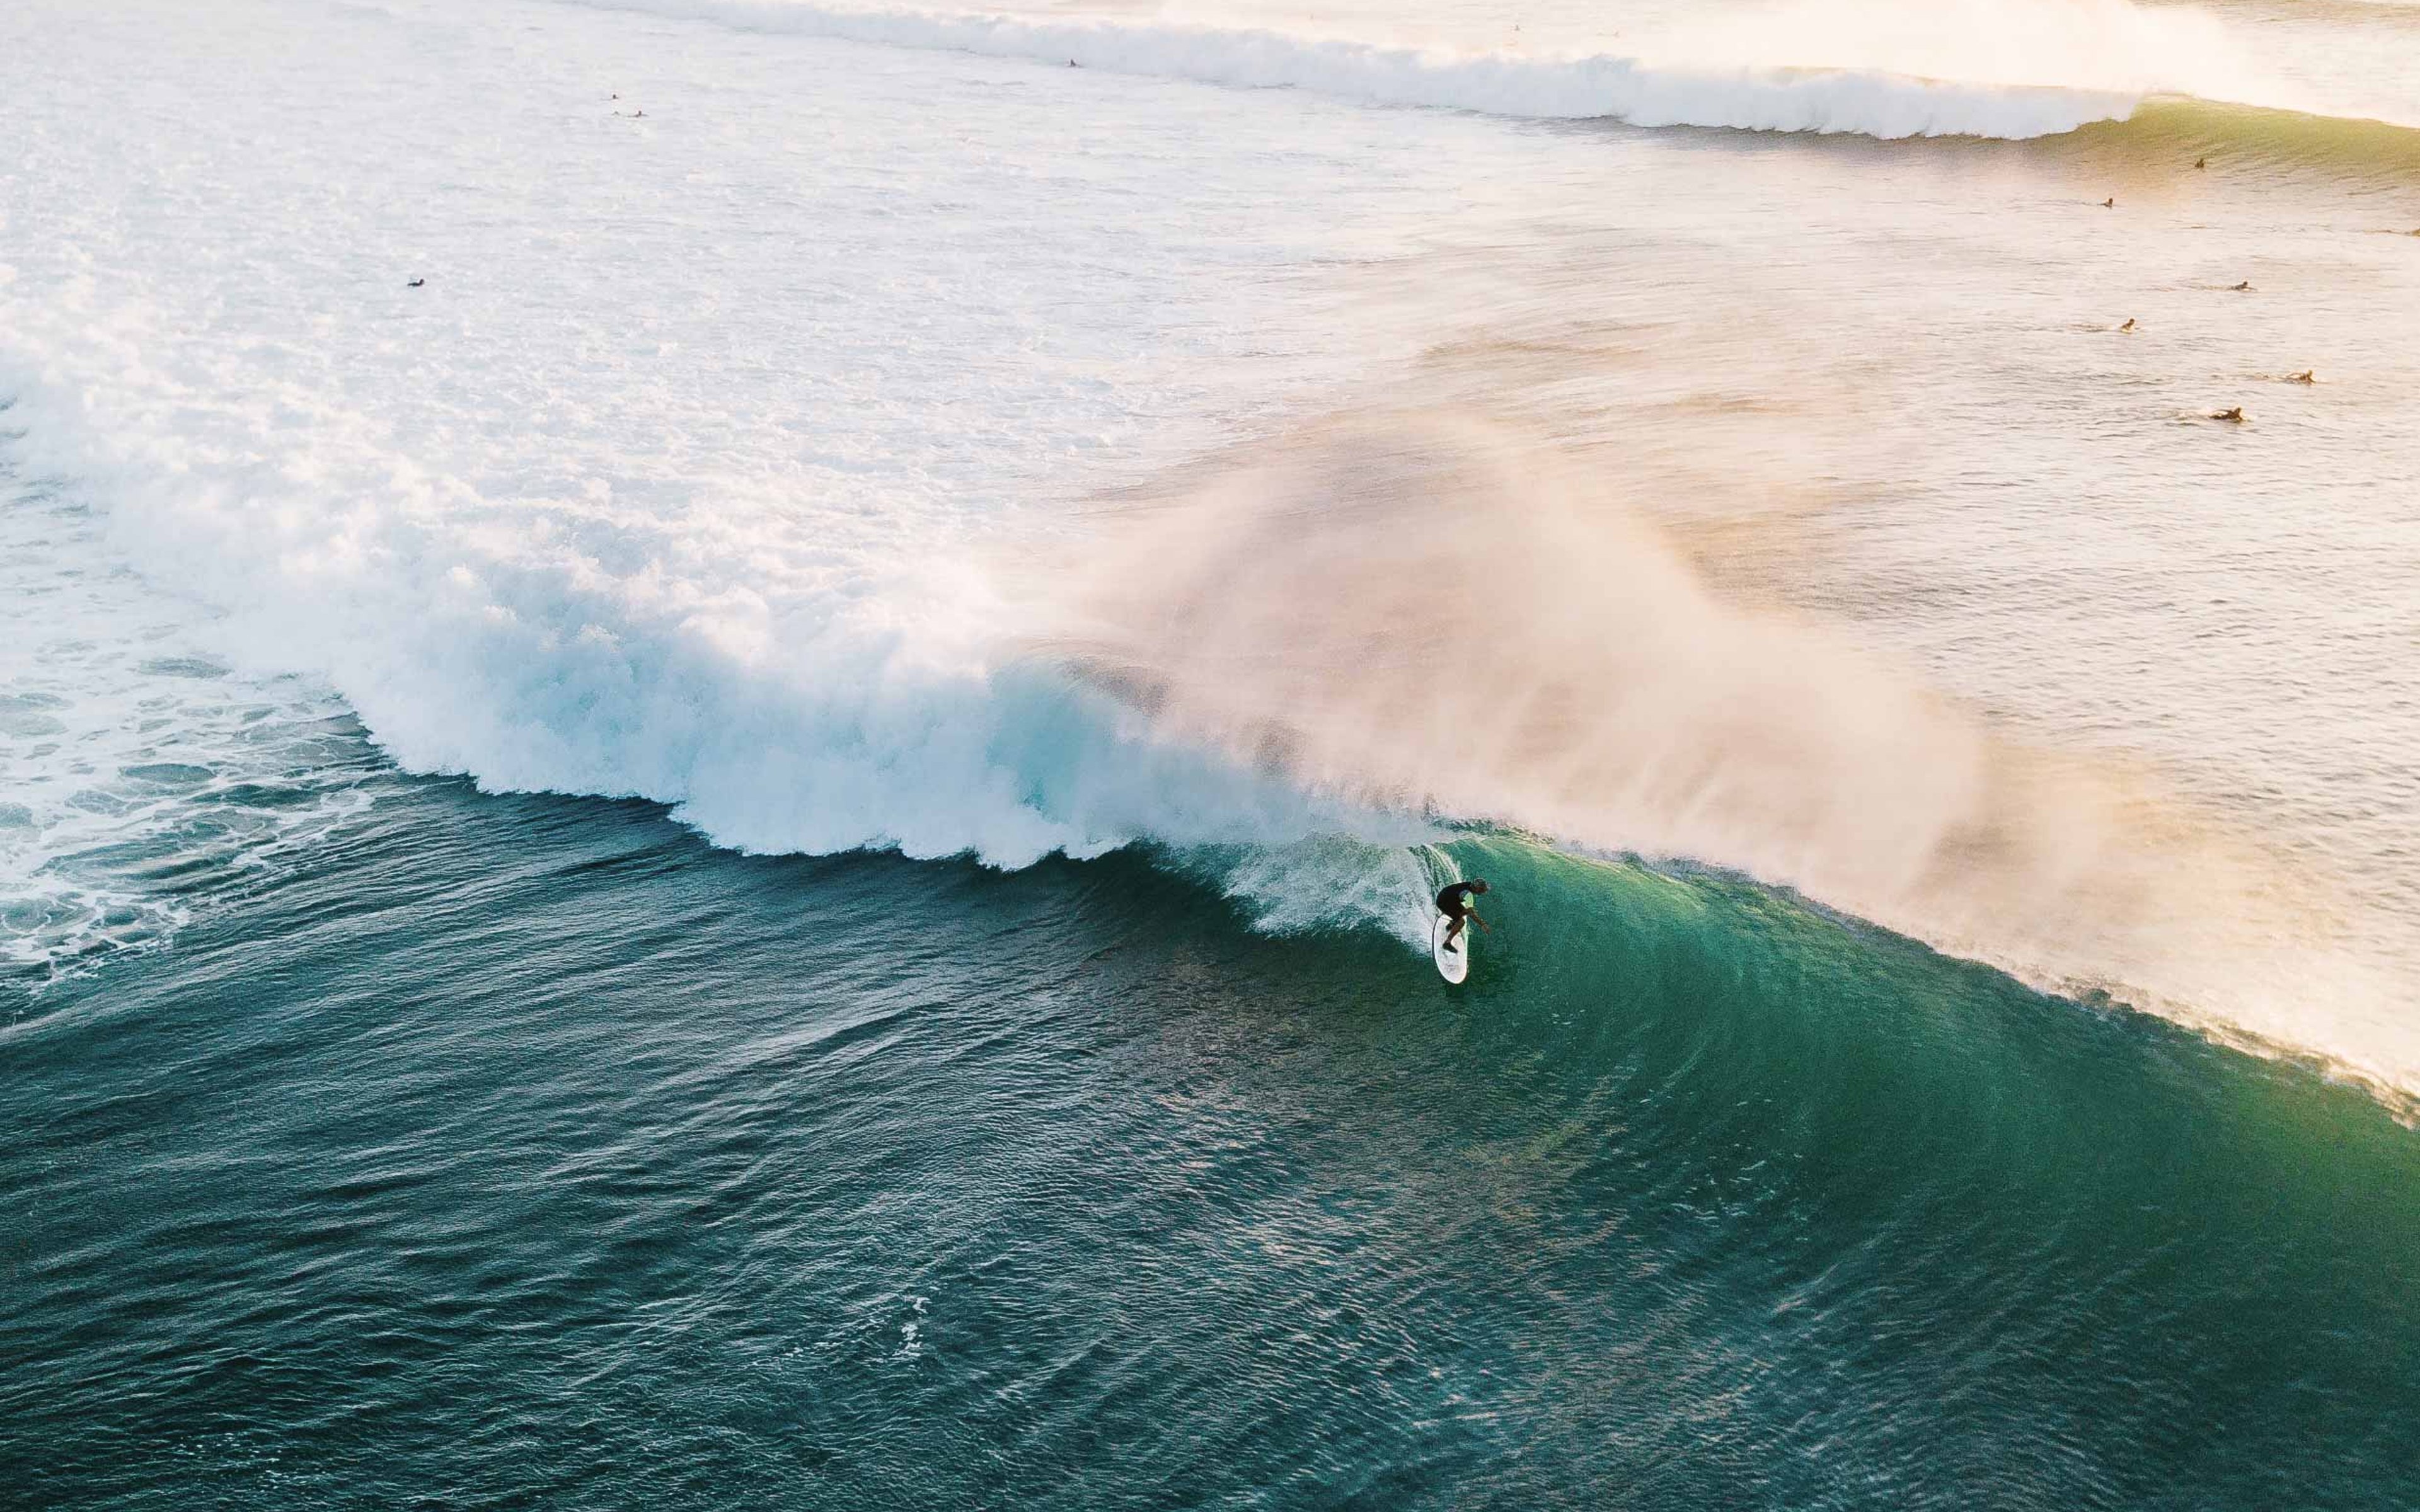 An aerial view of a surfer at the end of a rolling wave.